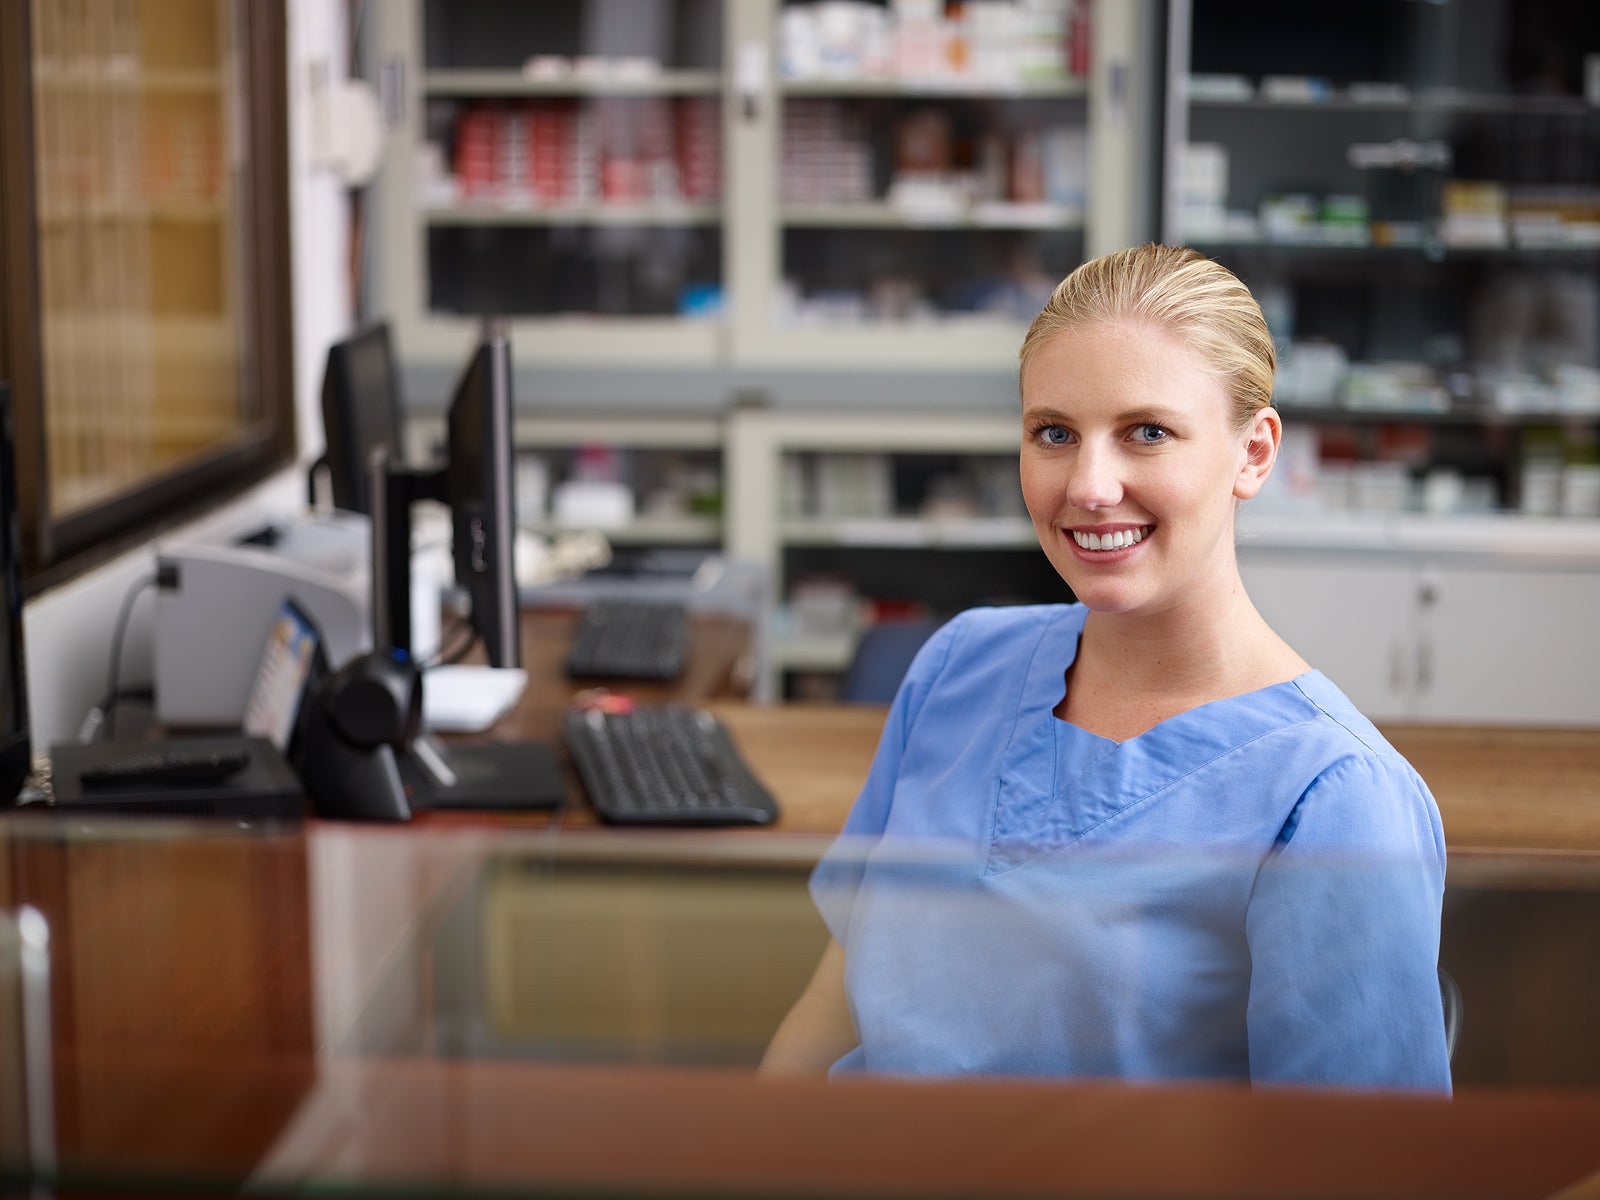 Young woman at work as receptionist and nurse in hospital looking at camera